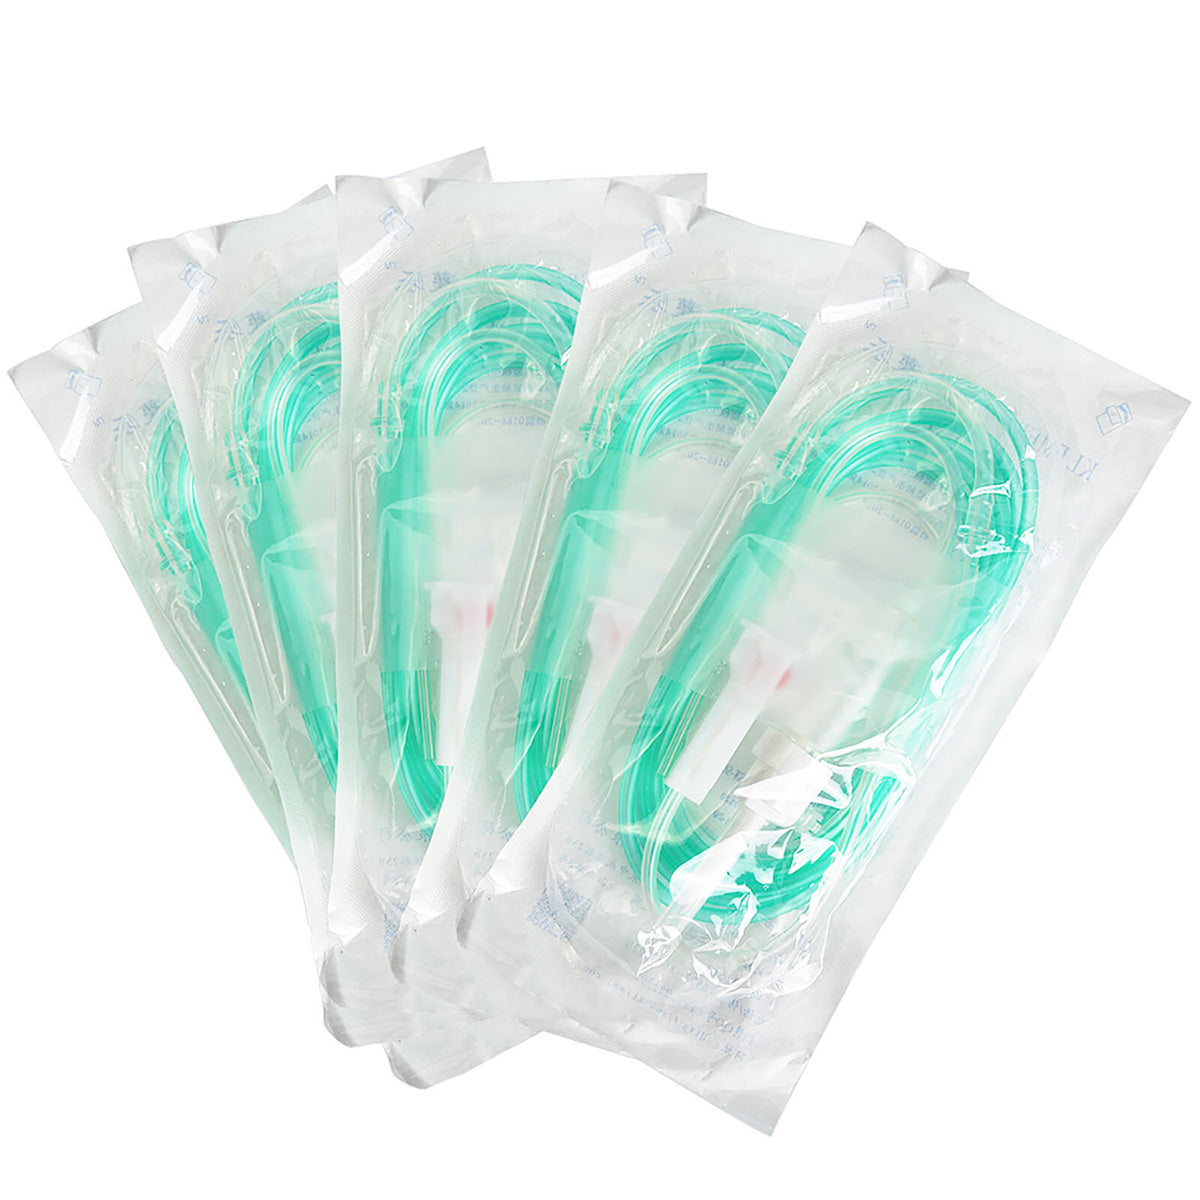 5 Bags Disposable Implant Irrigation Tube Green - pairaydental.com